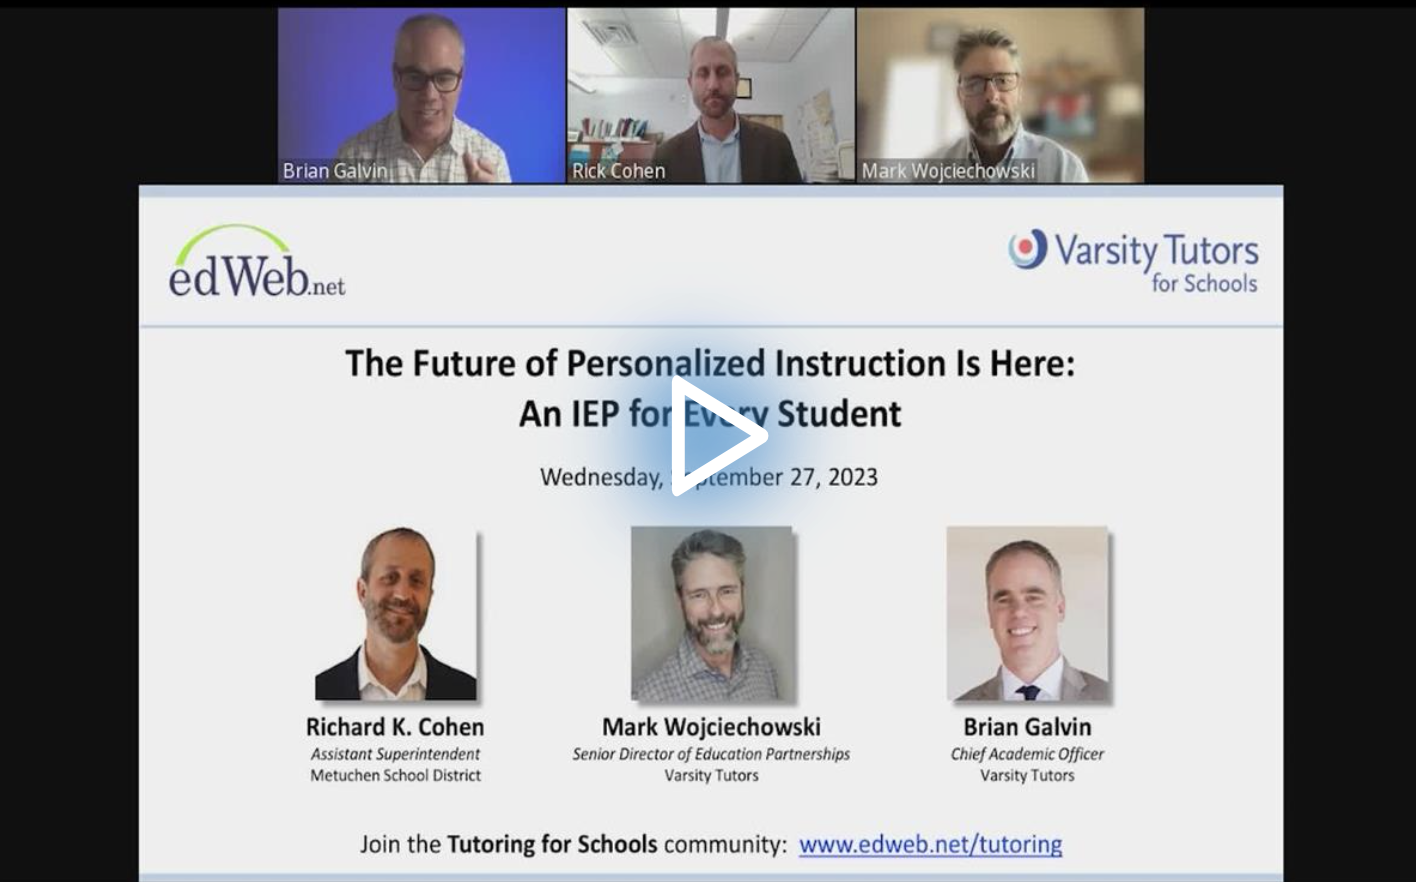 The Future of Personalized Instruction Is Here: An IEP for Every Student edLeader Panel recording screenshot